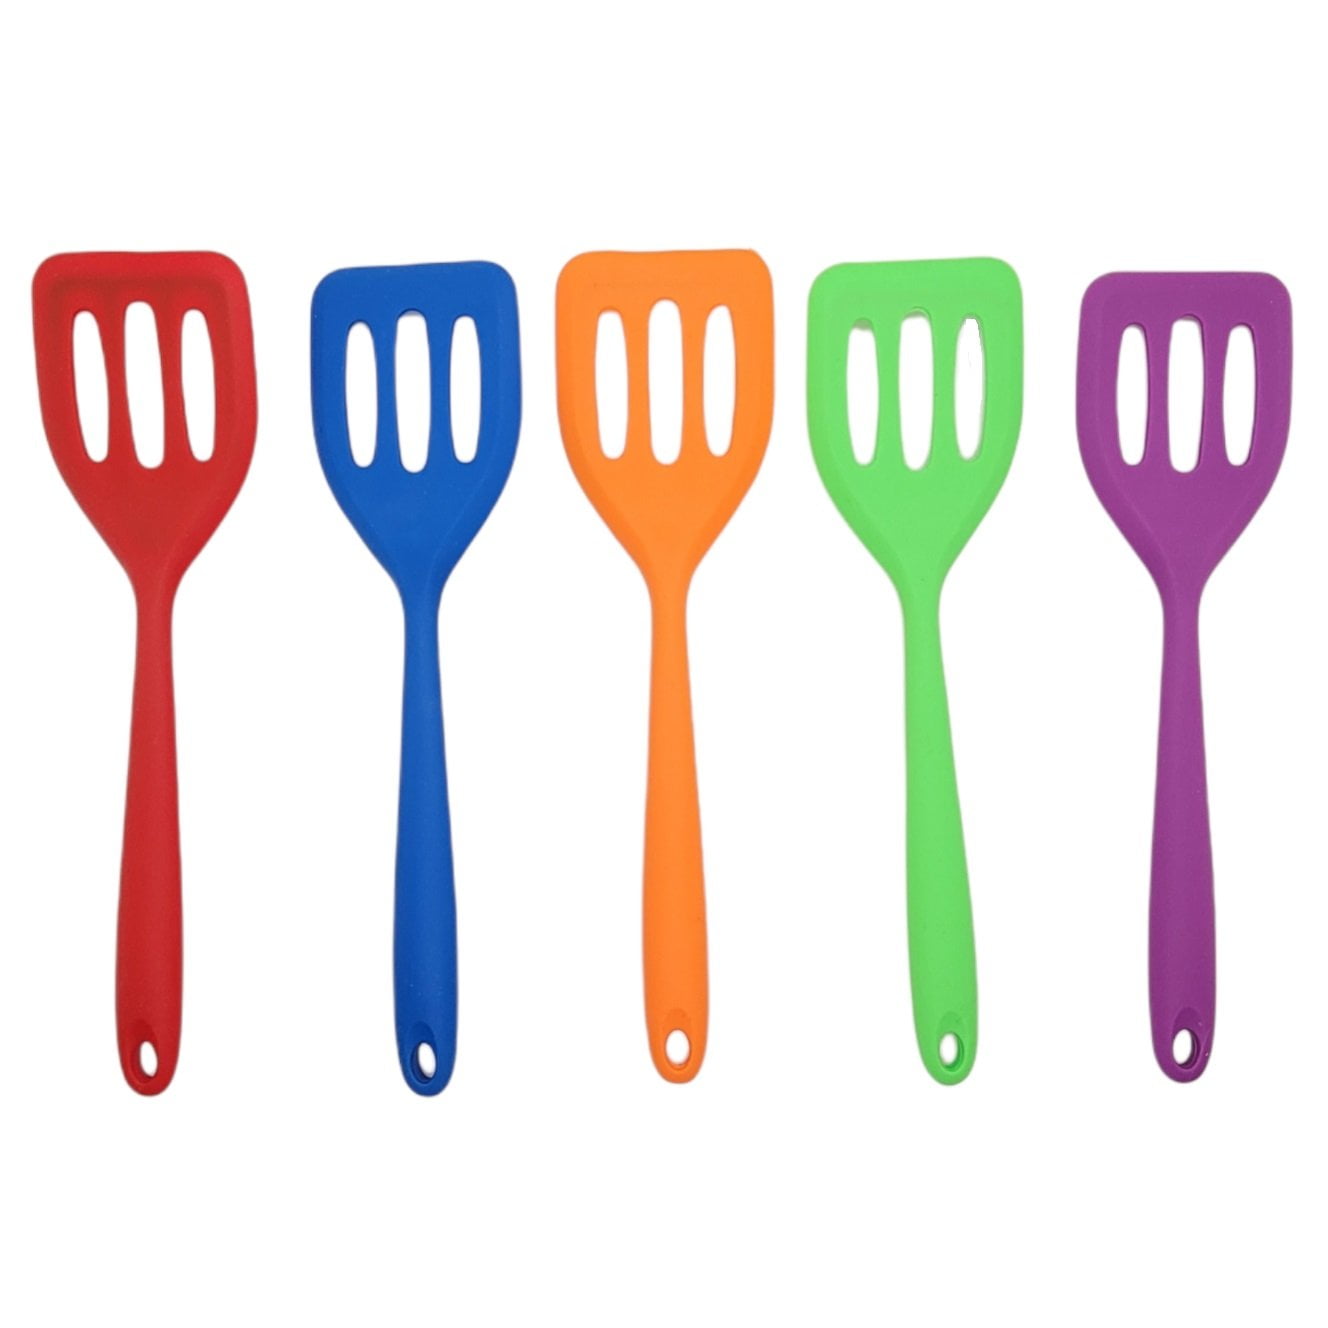 Pack of 2 Silicone Solid Turner ,Non Stick Slotted Kitchen Spatulas —  BundleP